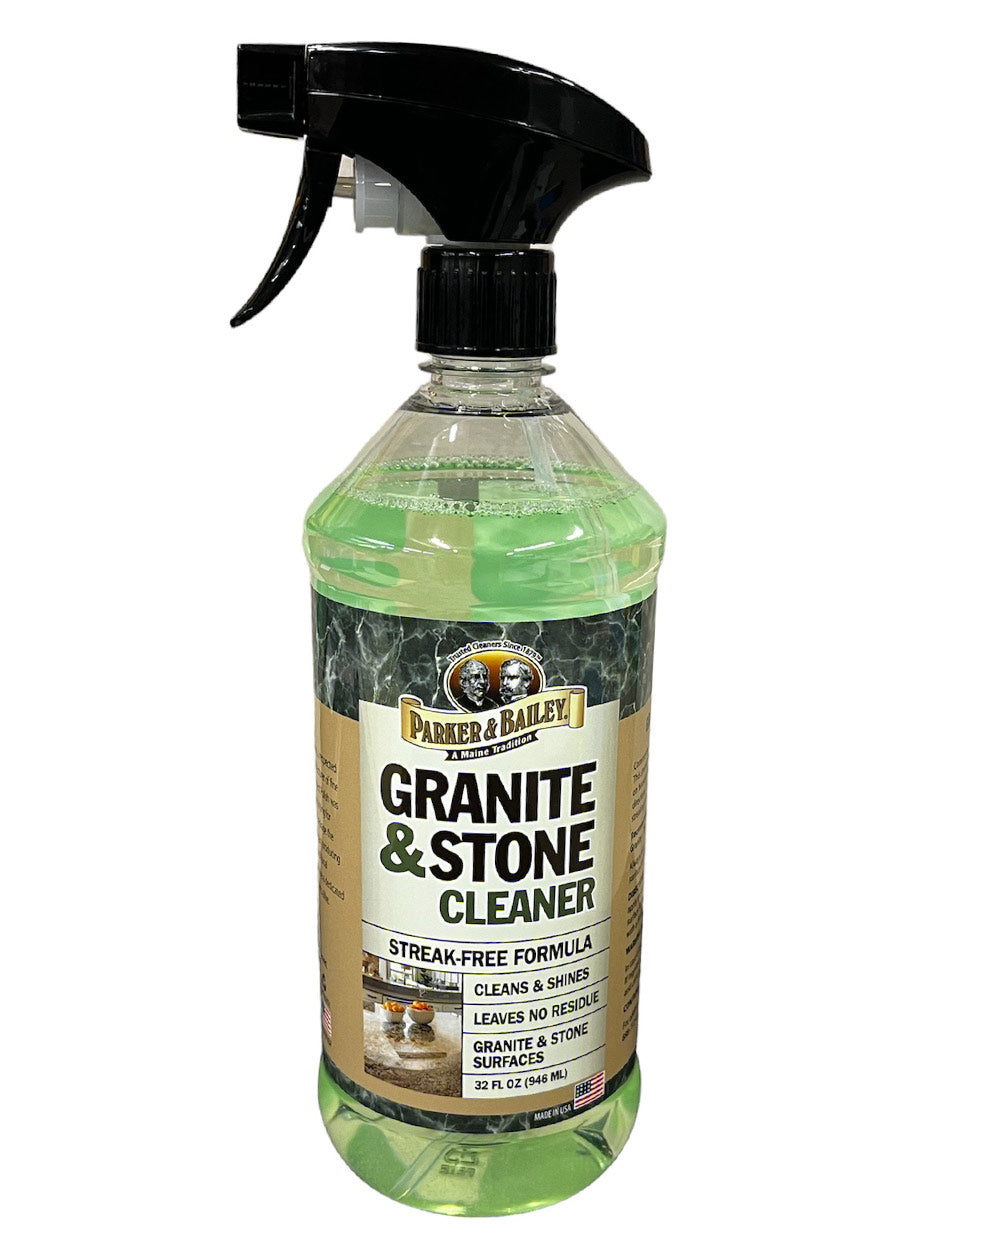 Parker & Bailey granite and stone cleaner on a white back ground